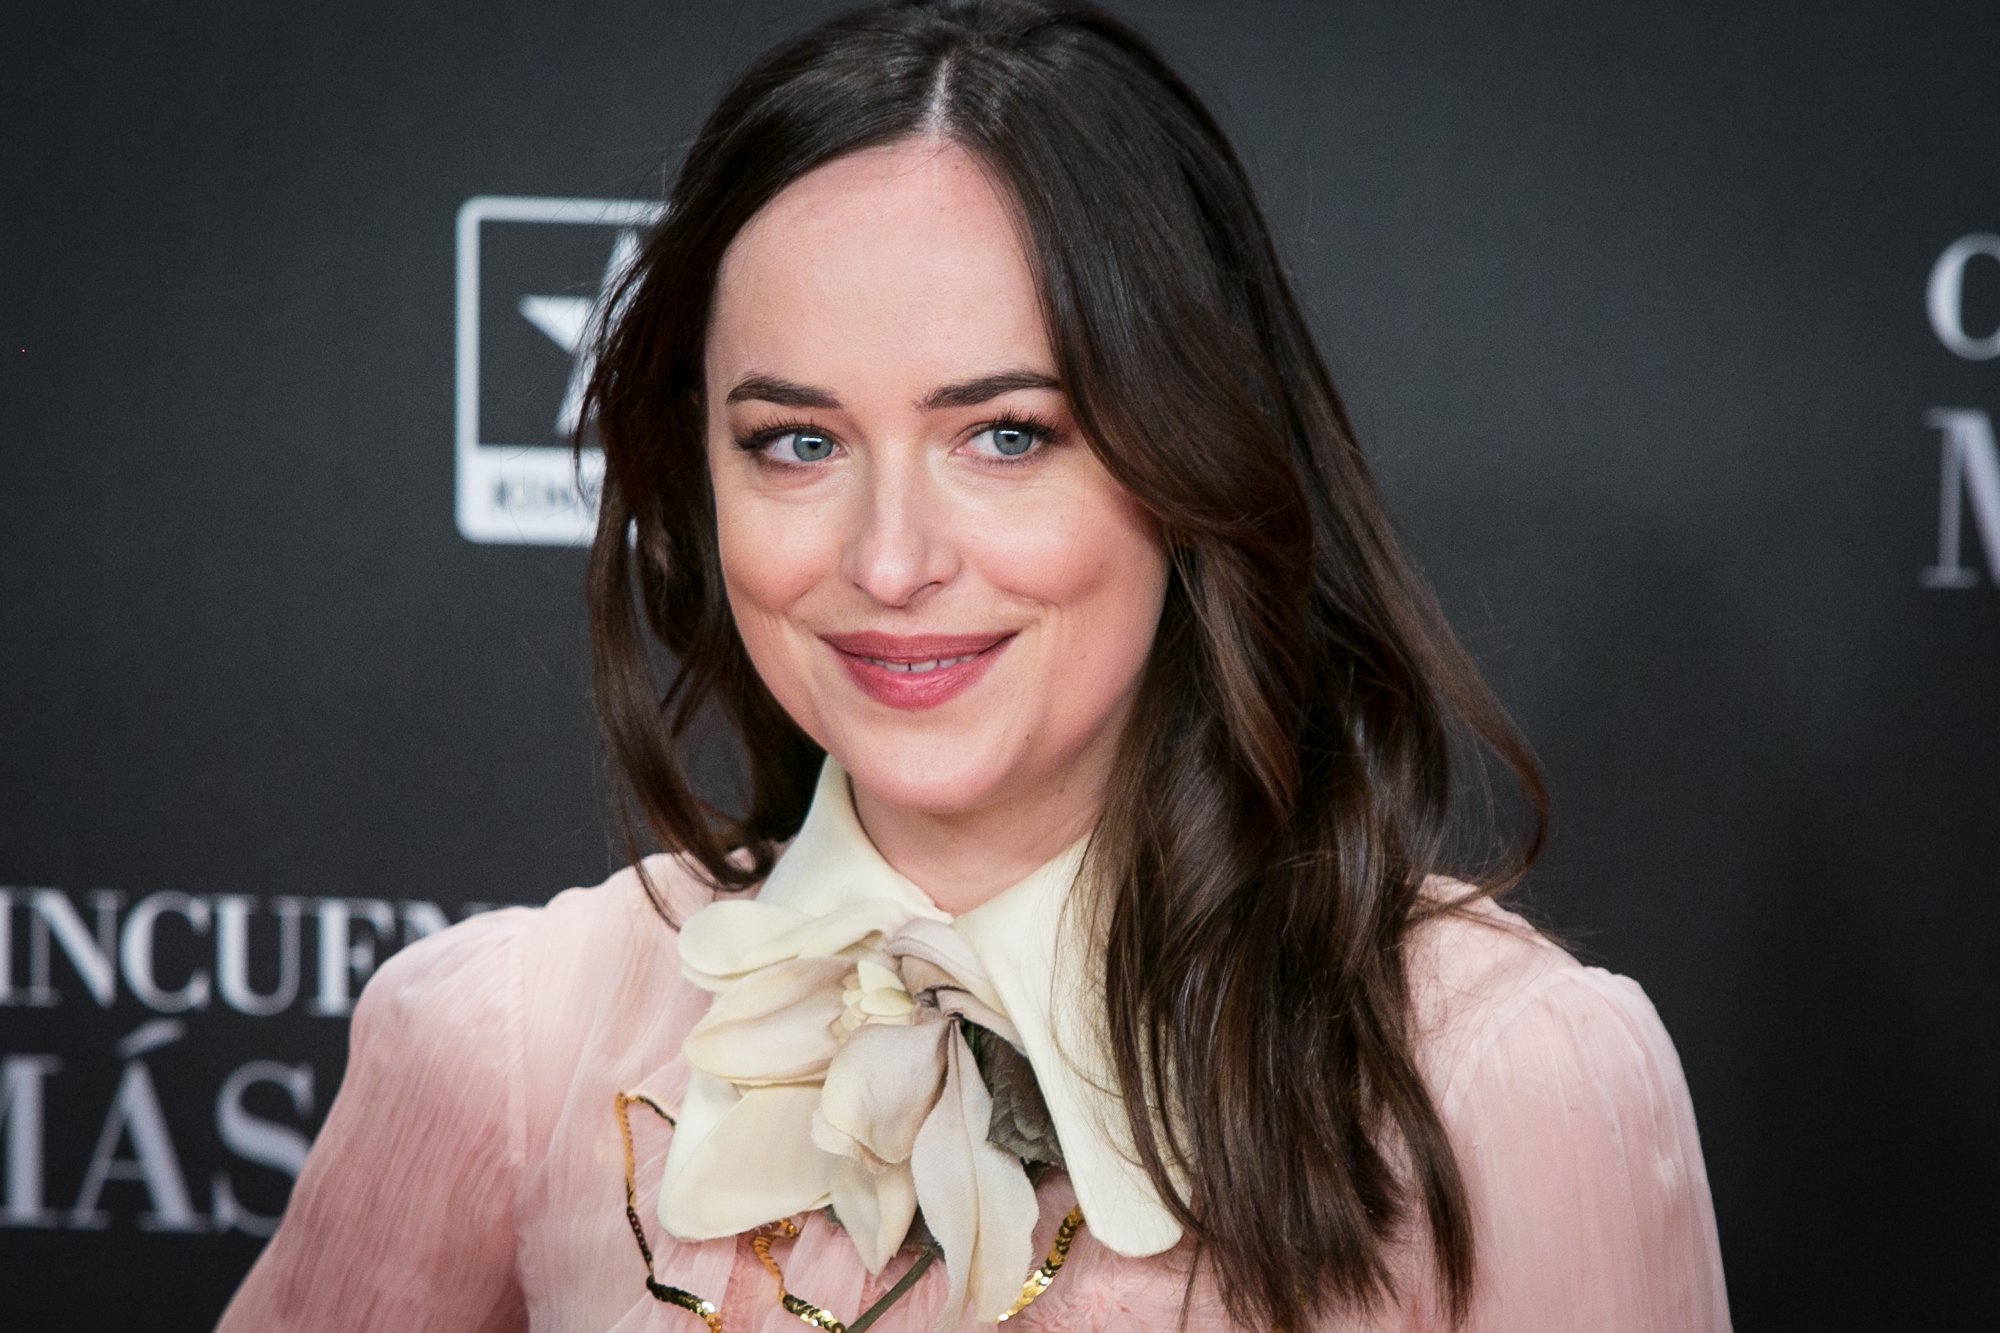 'Fifty Shades of Grey' actor Dakota Johnson smiling with a pink shirt on in front of movie step and repeat